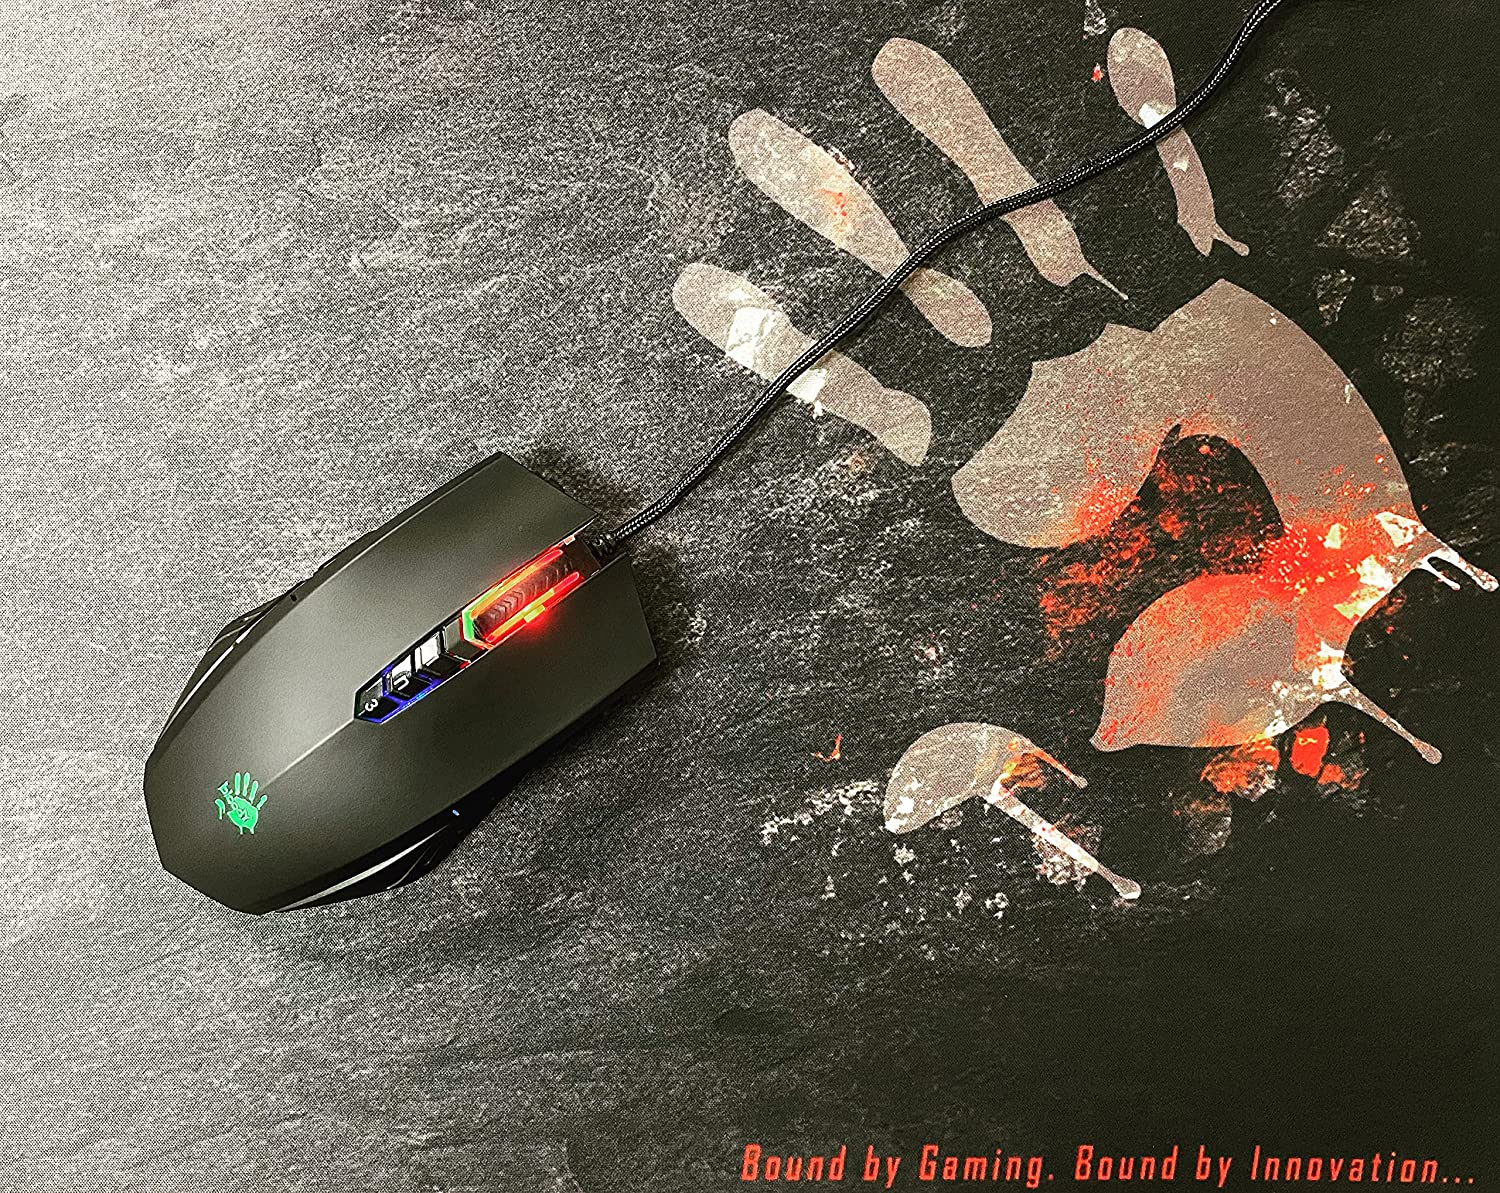 Gaming mouse drag clicking can put stress on mouse buttons. Make sure that the gaming mouse that you are using is suitable and durable enough for drag clicking.